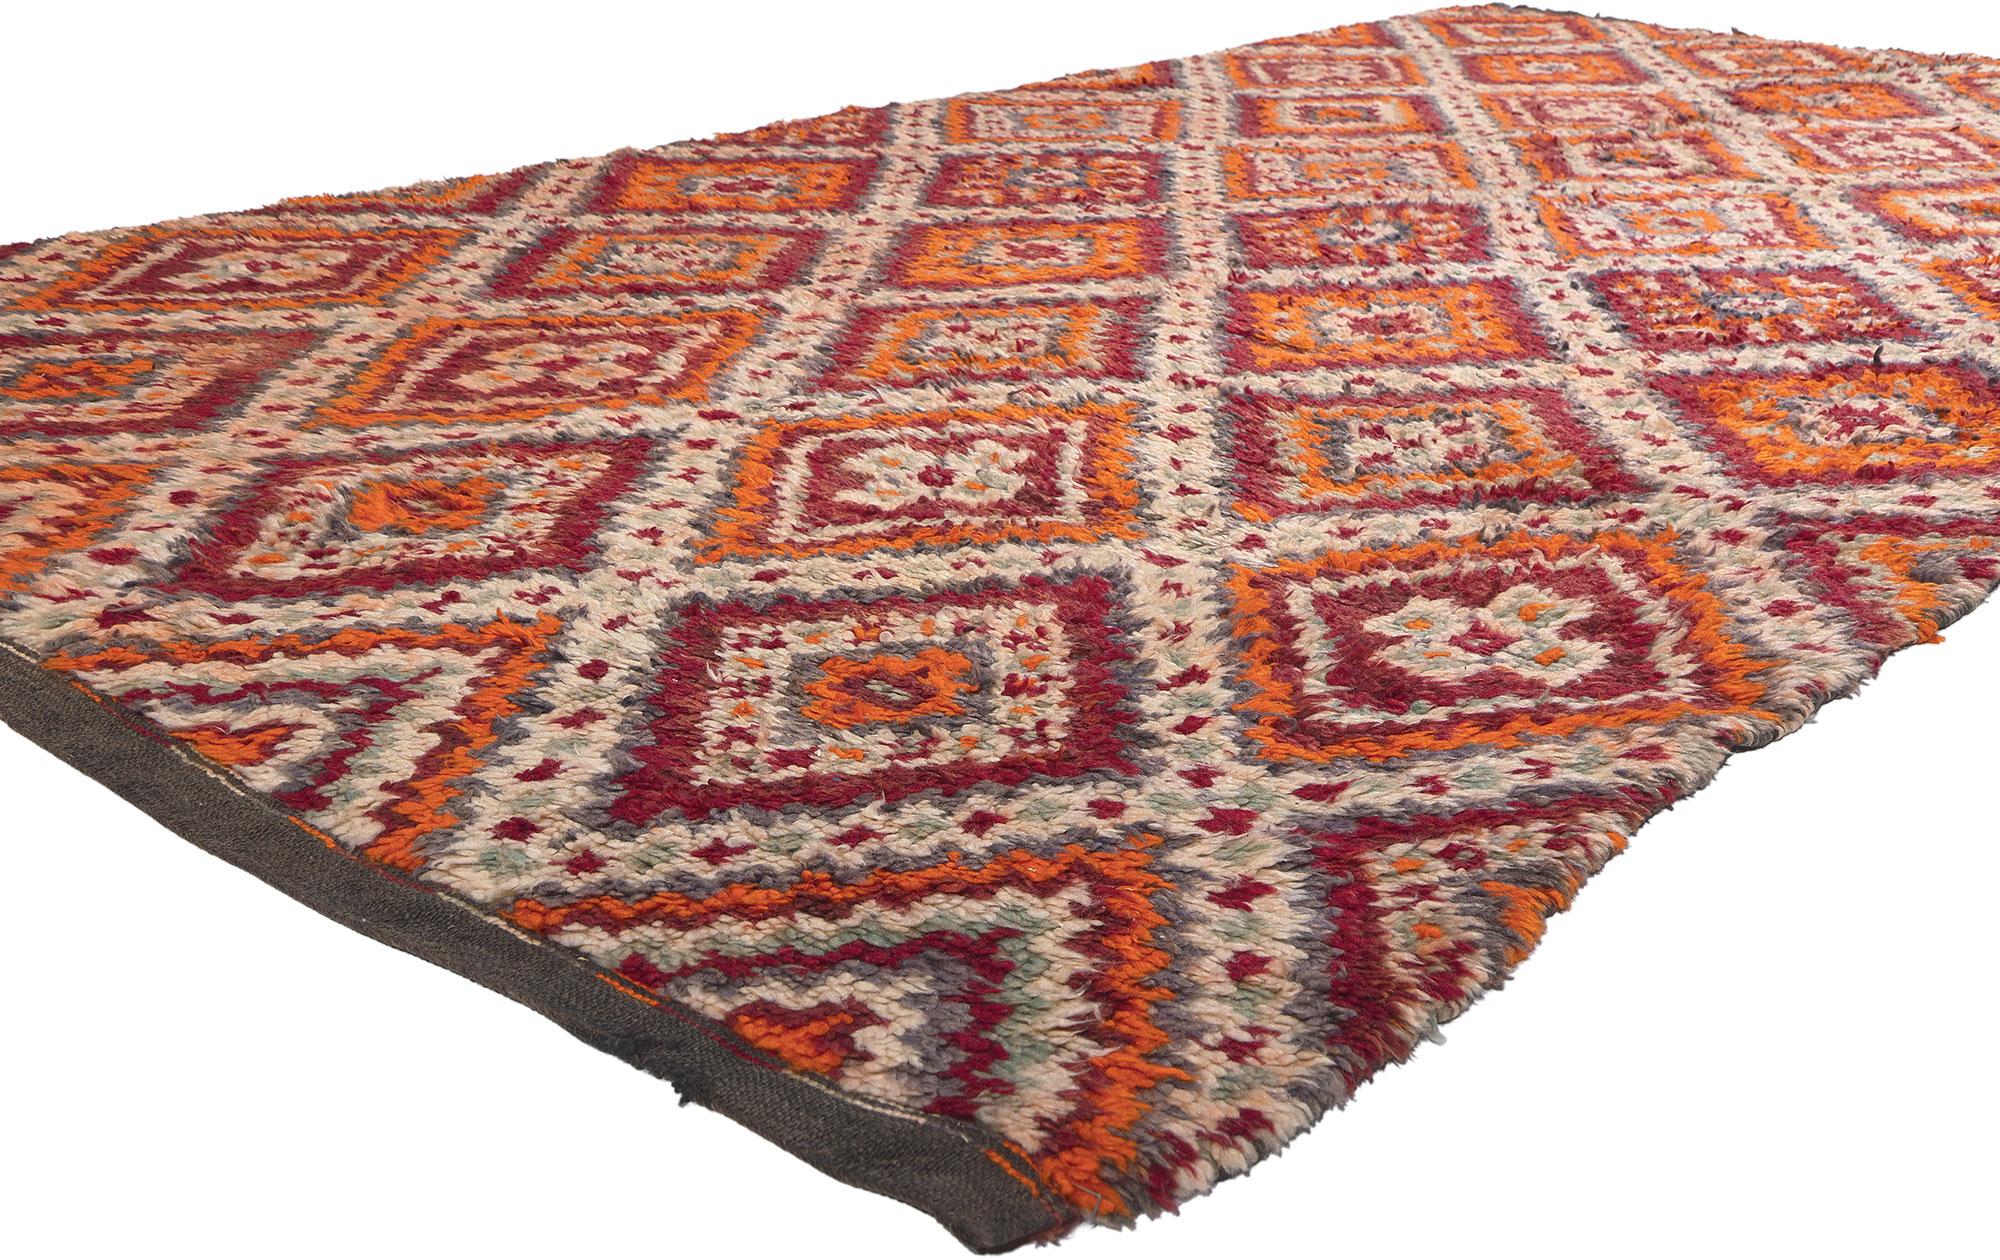 20976 Vintage Taznakht Moroccan Rug, 06'00 x 11'06. Embark on a journey into the rich legacy of the Taznakht Tribe, where skilled hands in the High Atlas Mountains of southern Morocco meticulously crafted this hand-knotted wool vintage Moroccan